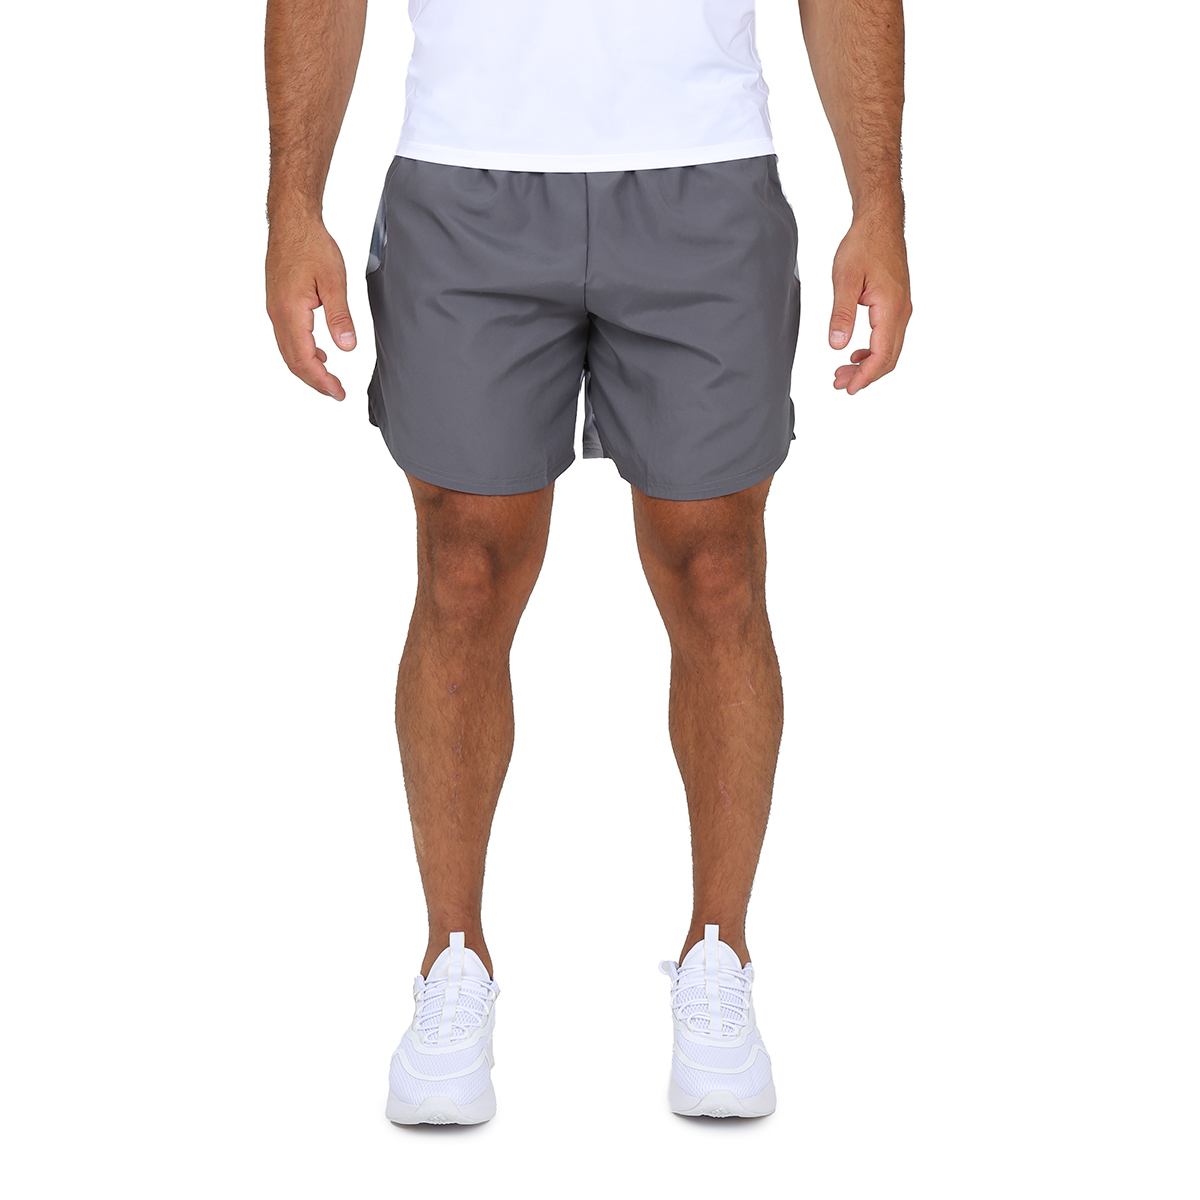 Short Entrenamiento adidas Designed For Movement Hiit Hombre,  image number null